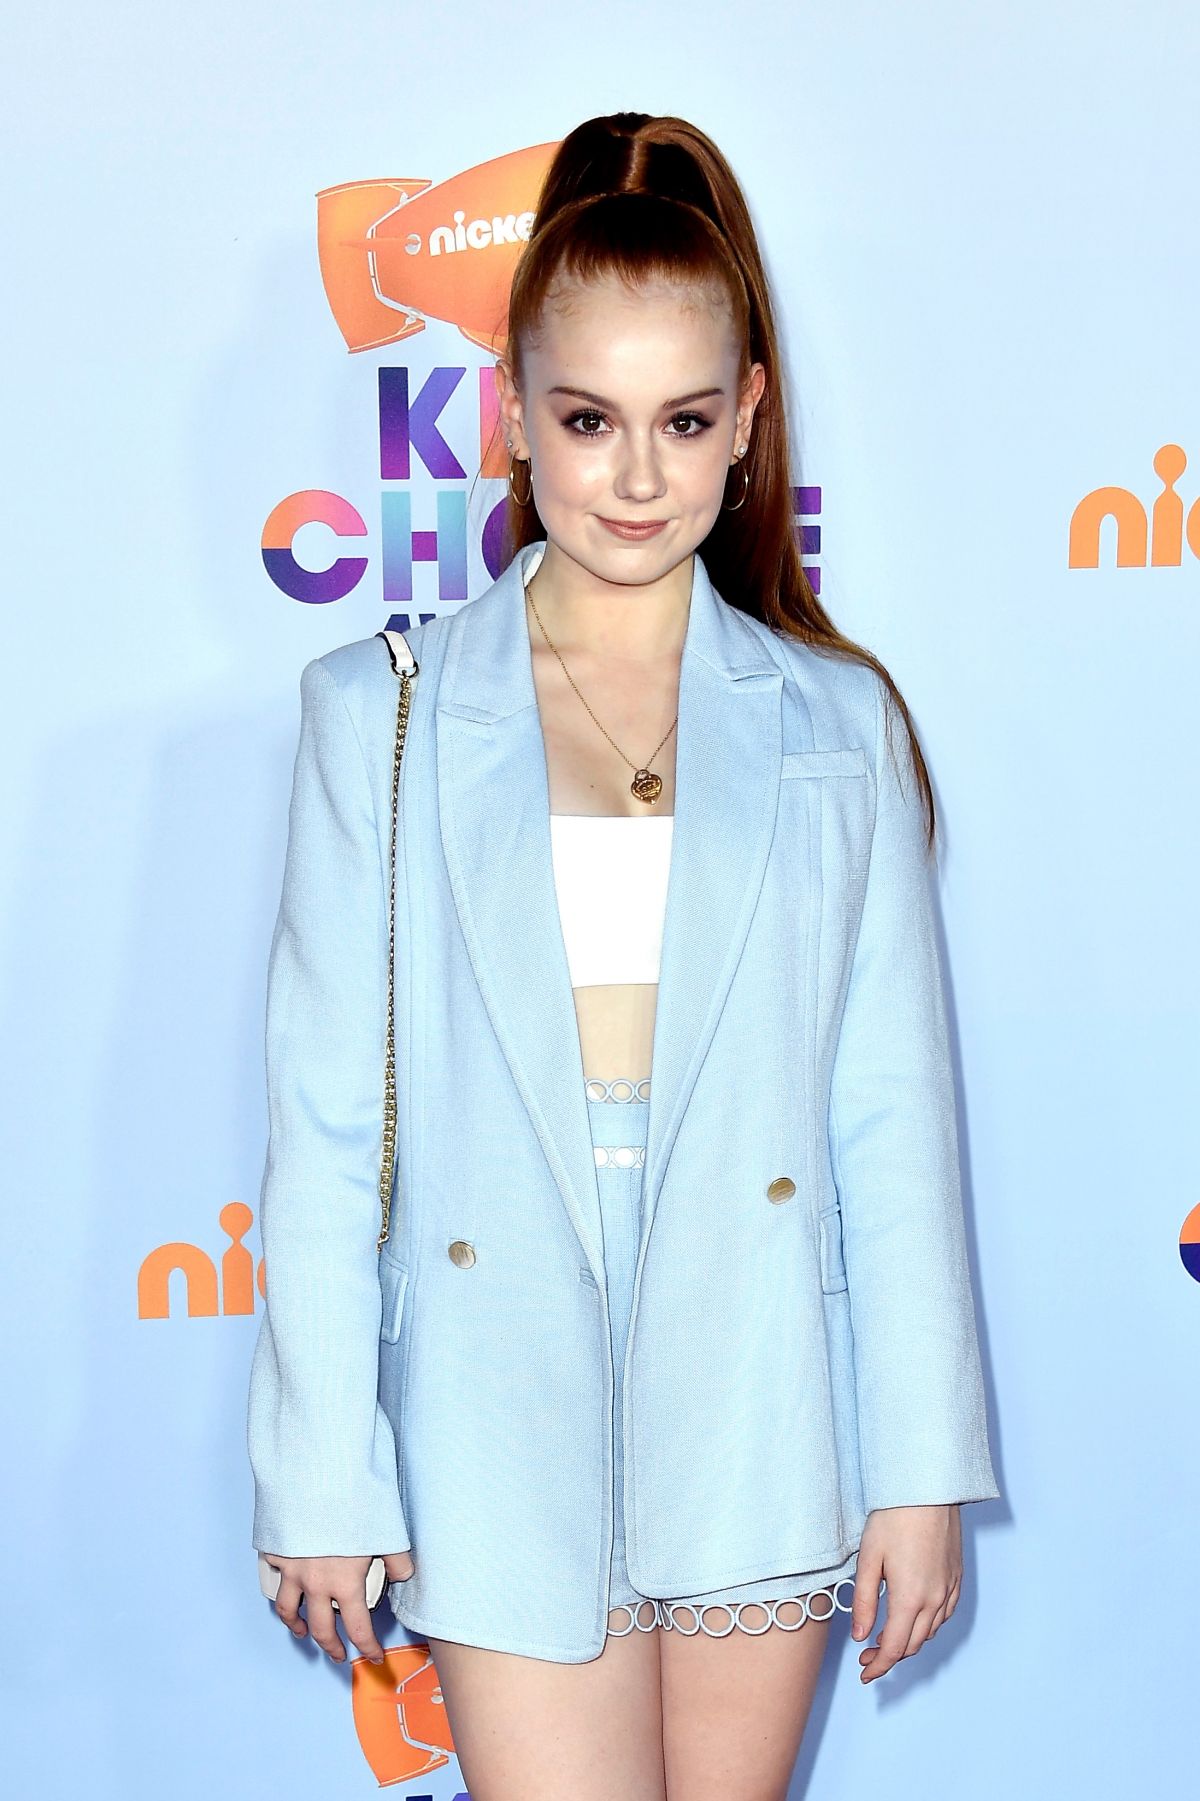 ASHLEIGH ROSS at Nickelodeon 2017 Kids’ Choice Awards in Los Angeles 03/11/2017